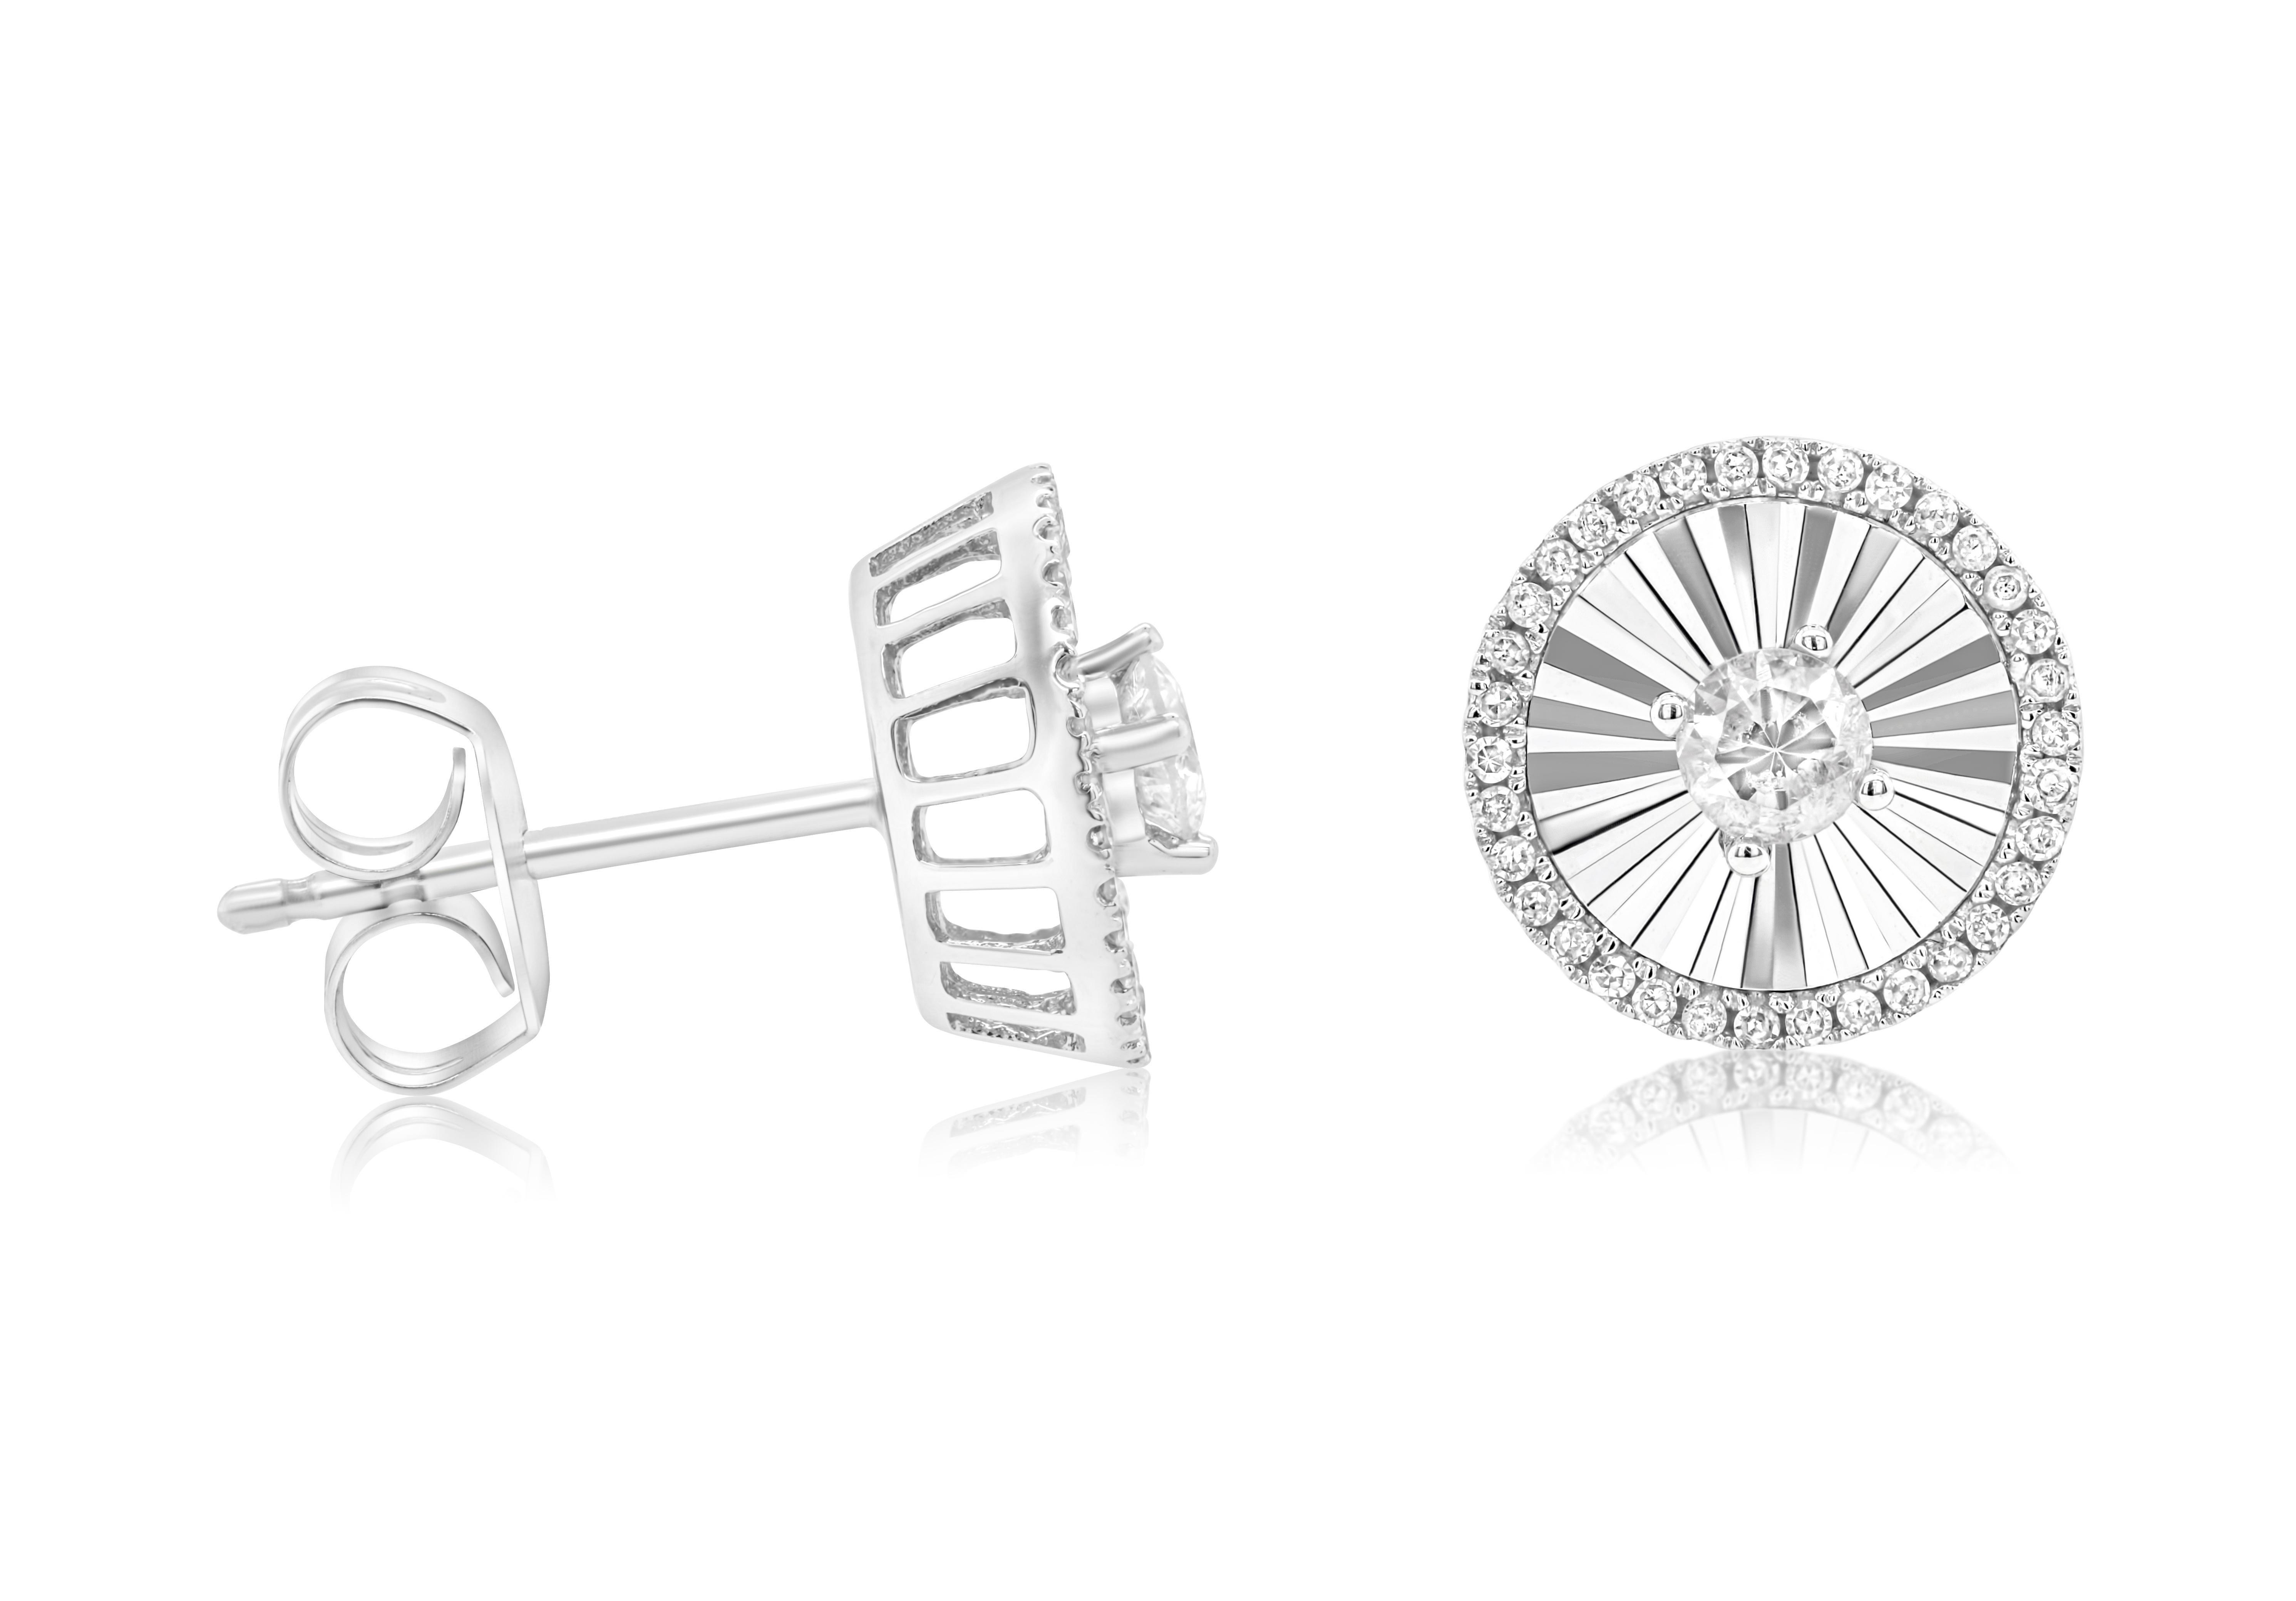 14kt white gold diamond sunburst round stud earrings containing 0.40 cts tw (FG SI)
Diana M. is a leading supplier of top-quality fine jewelry for over 35 years.
Diana M is one-stop shop for all your jewelry shopping, carrying line of diamond rings,